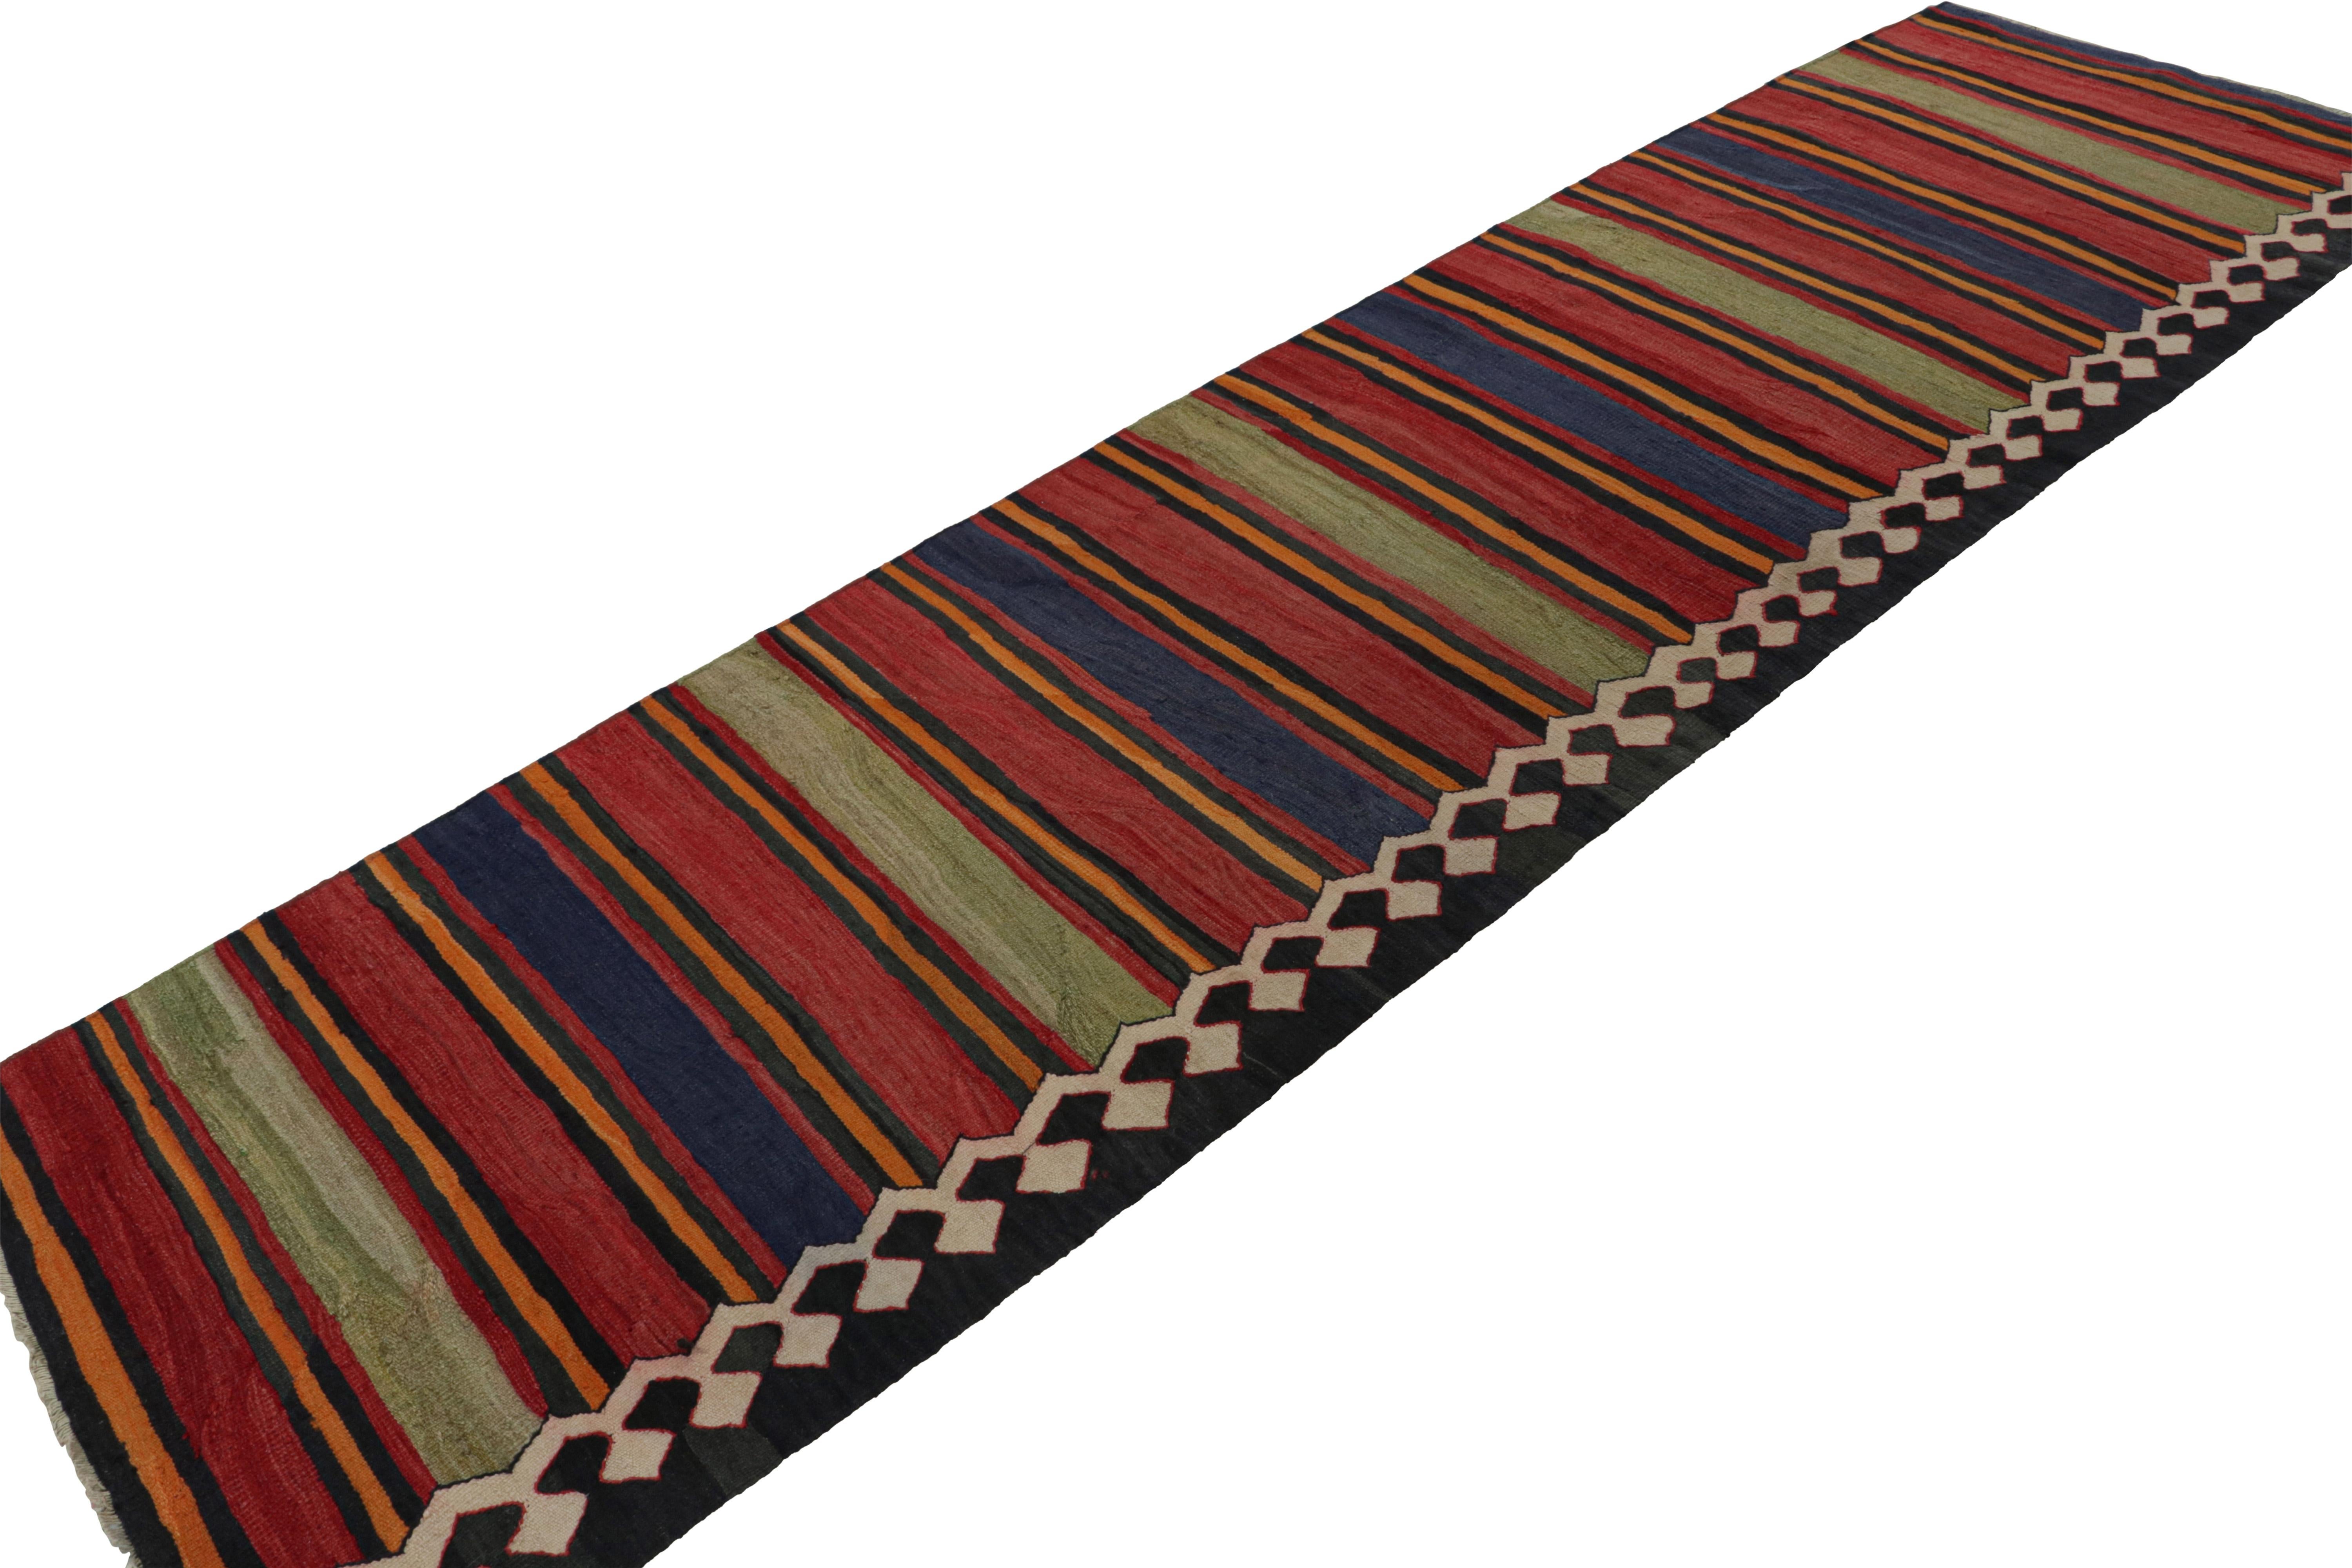 Hand knotted in wool, this 3x12 vintage  Afghan tribal kilim runner rug, originating circa 1950-1960, is an exciting new addition to the Rug & Kilim collection.  

On the Design: 

Originating from Afghanistan, this runner rug is a rich versatile